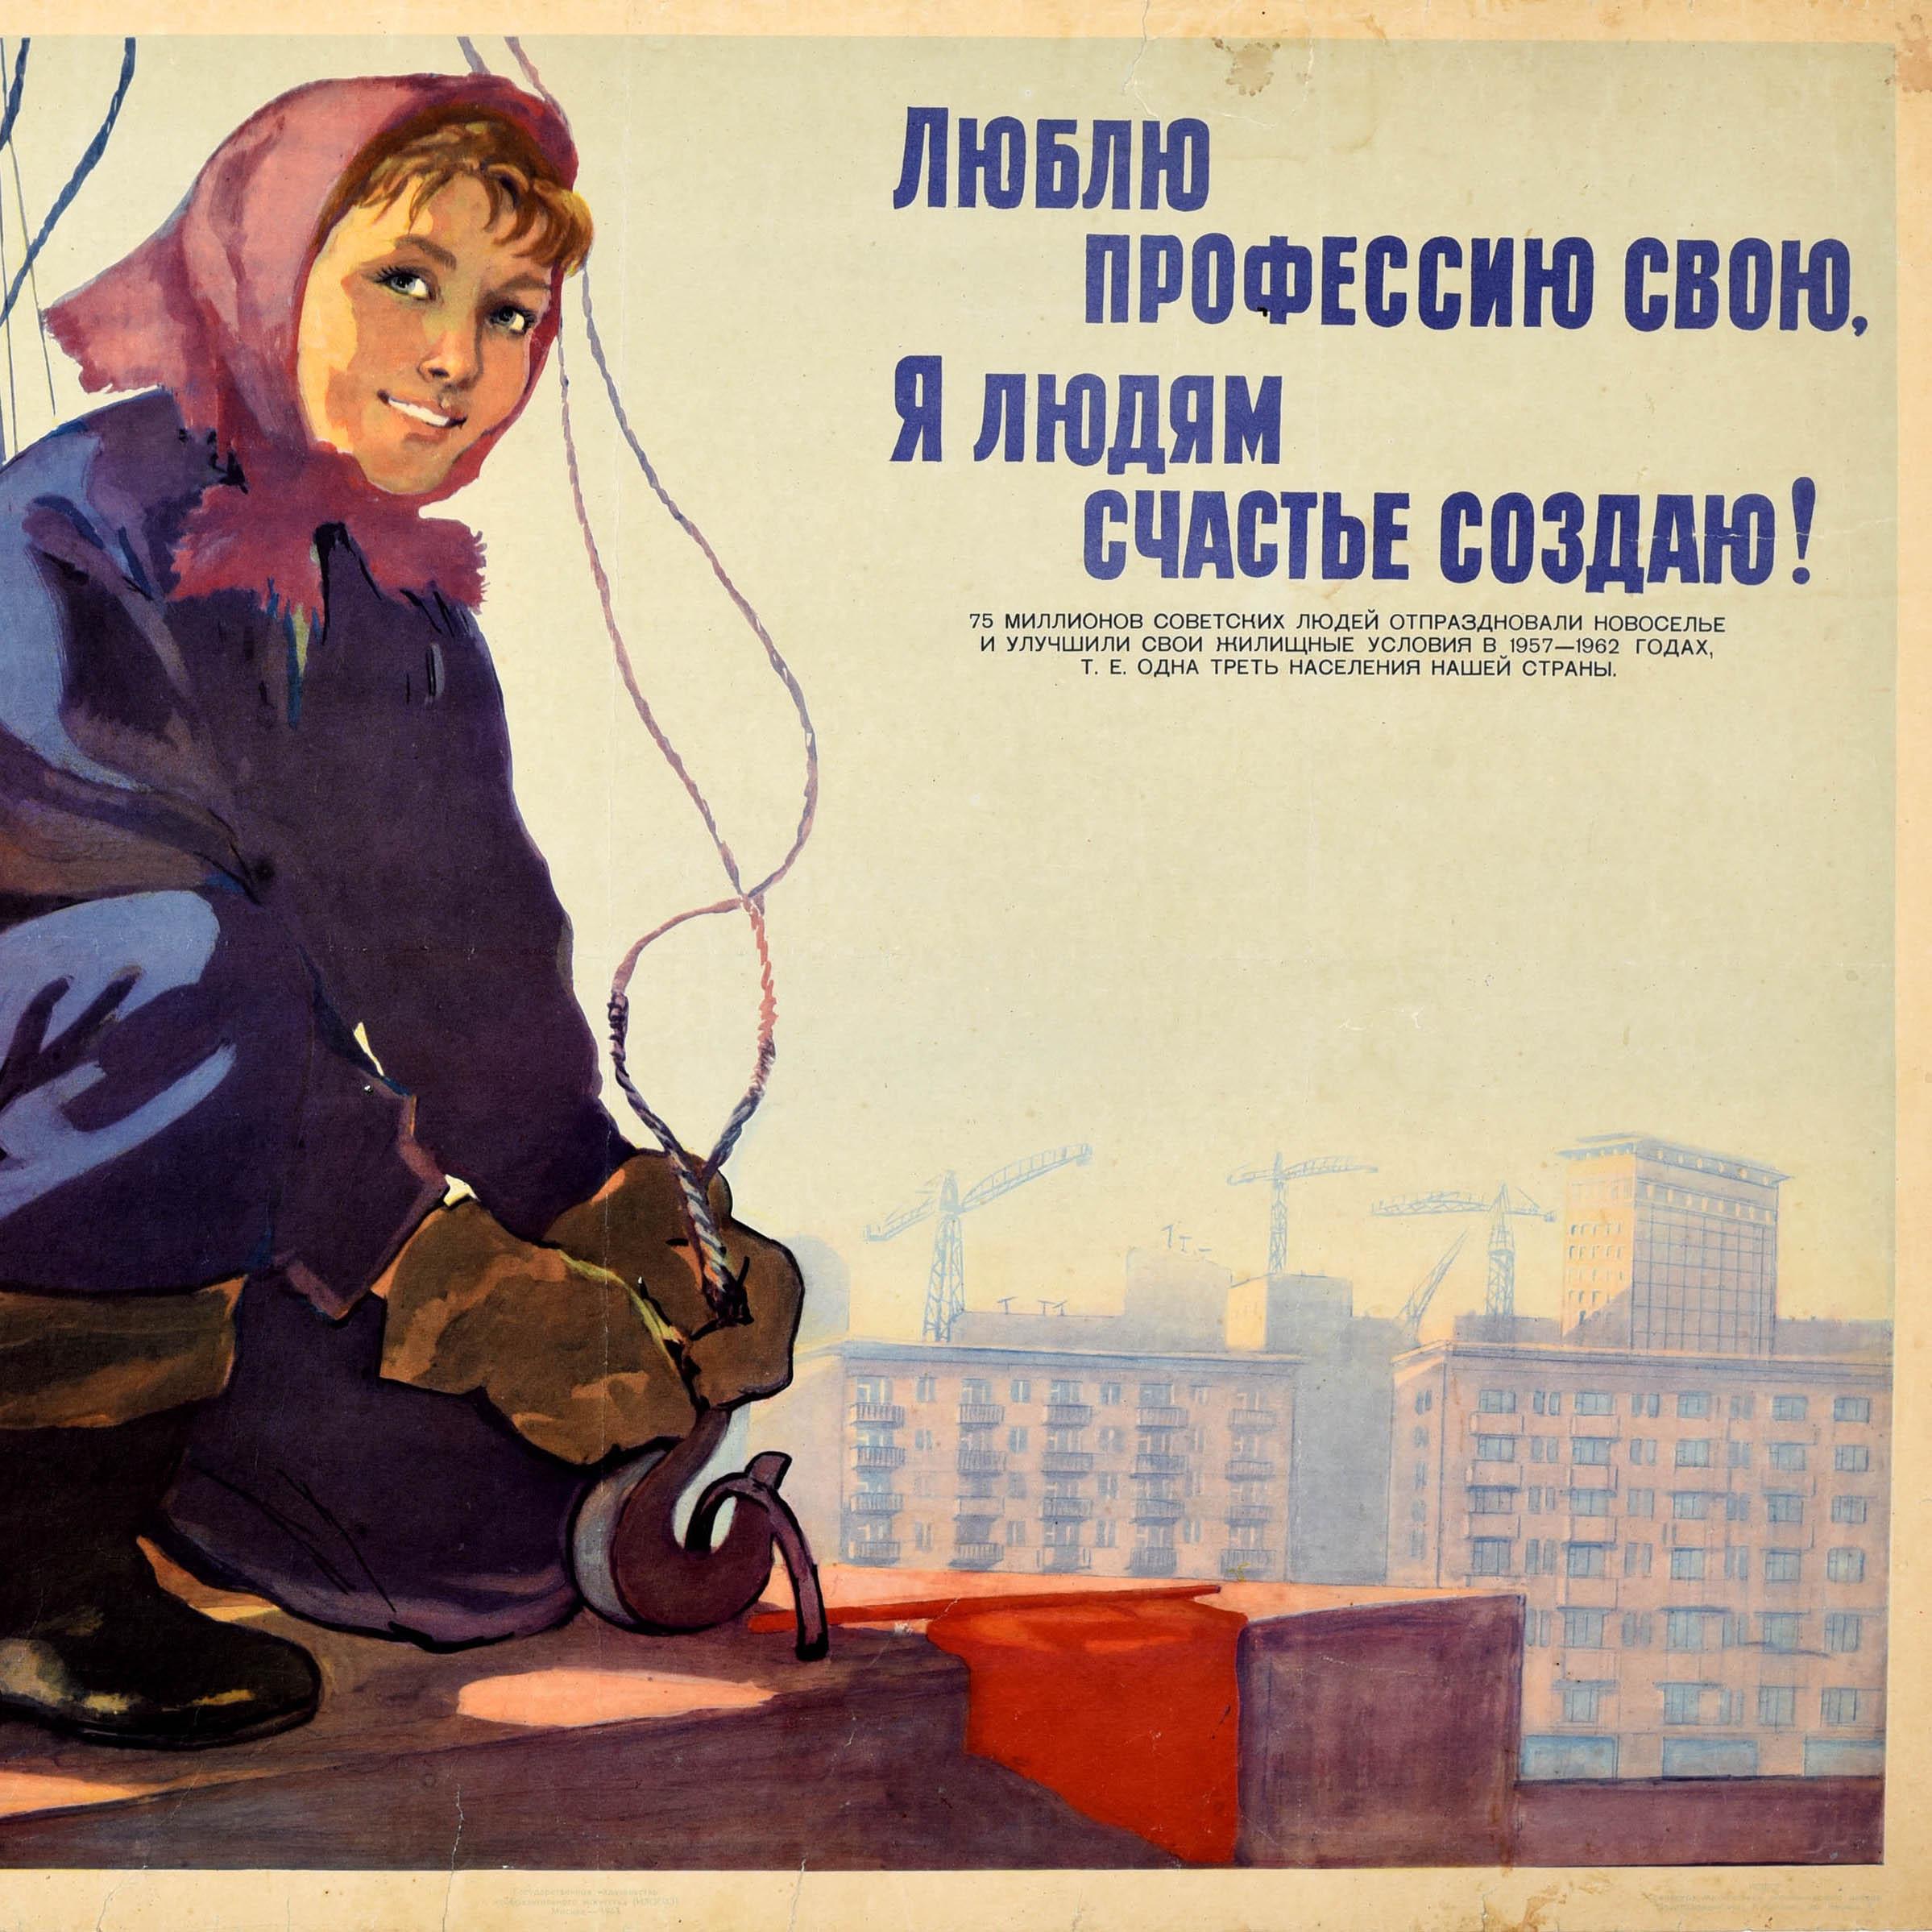 Original vintage Soviet propaganda poster - I love my profession I create happiness for people! / Люблю Профессию, Я Людям Счастье Создаю! Great design depicting a lady wearing a headscarf and overalls, boots and gloves working on a high rise